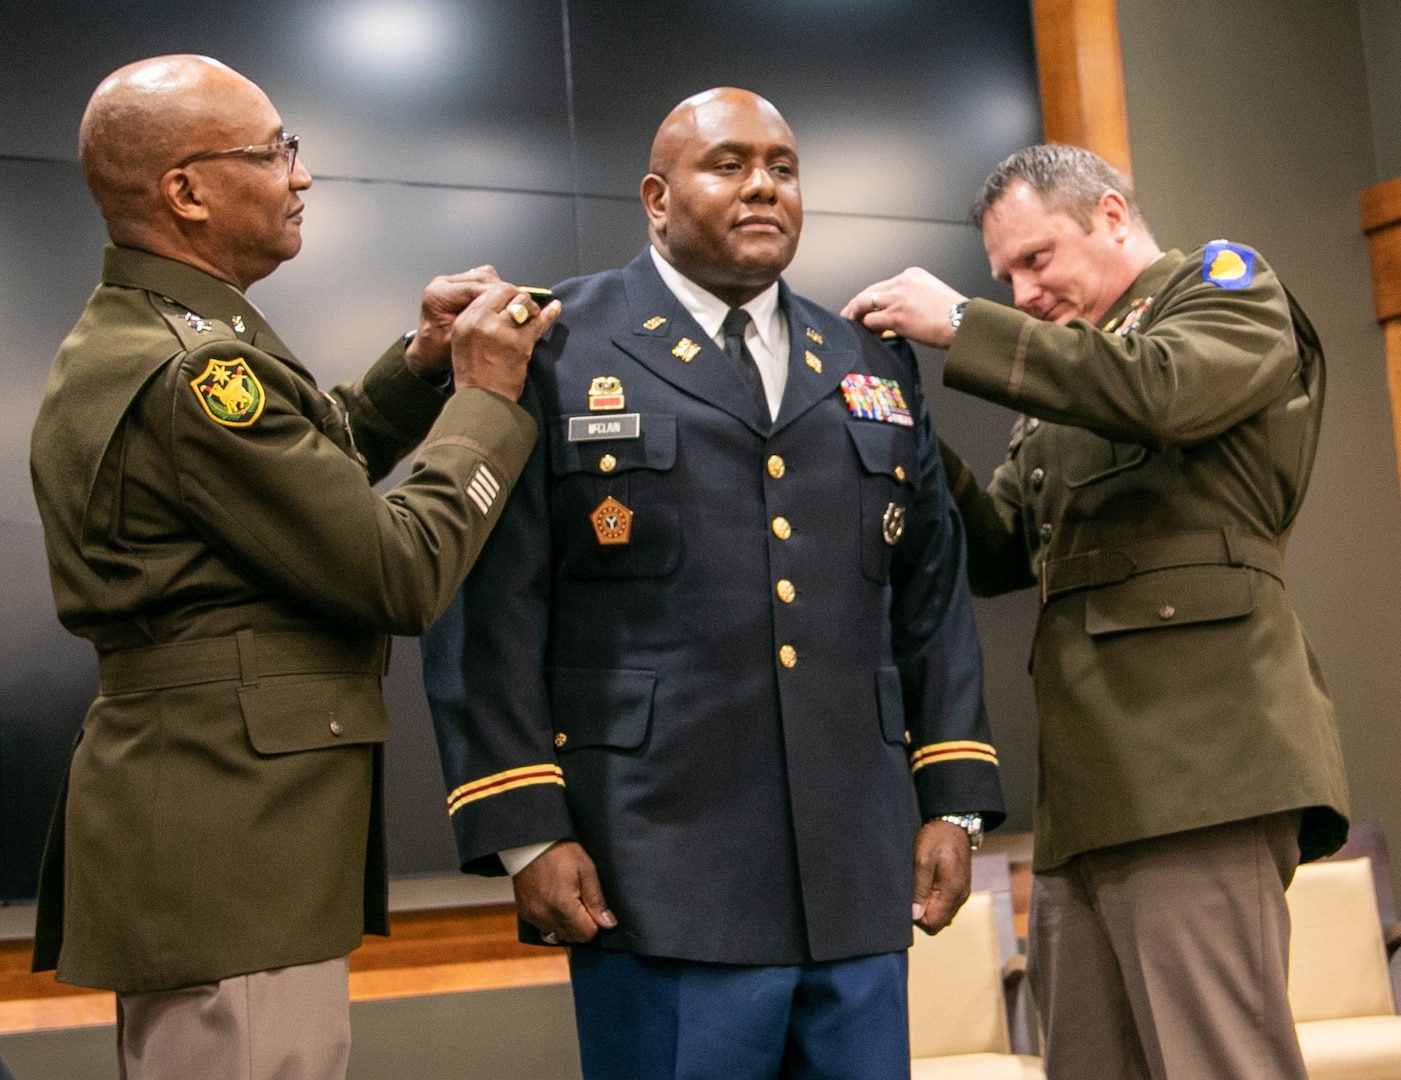 Maj. Gen. Rodney Boyd, Assistant Adjutant General-Army and Commander of the Illinois Army National Guard, and Lt. Col. Andrew Adamczyk, Deputy Director, Strategic Planning and Policy, Illinois National Guard, pin new rank on newly-promoted Maj. Anthony McClain, Security Cooperations Officer, and Director, Diversity, Equity and Inclusion, Illinois National Guard, during a promotion ceremony March 17 at the Illinois Military Academy on Camp Lincoln, Springfield, Illinois.